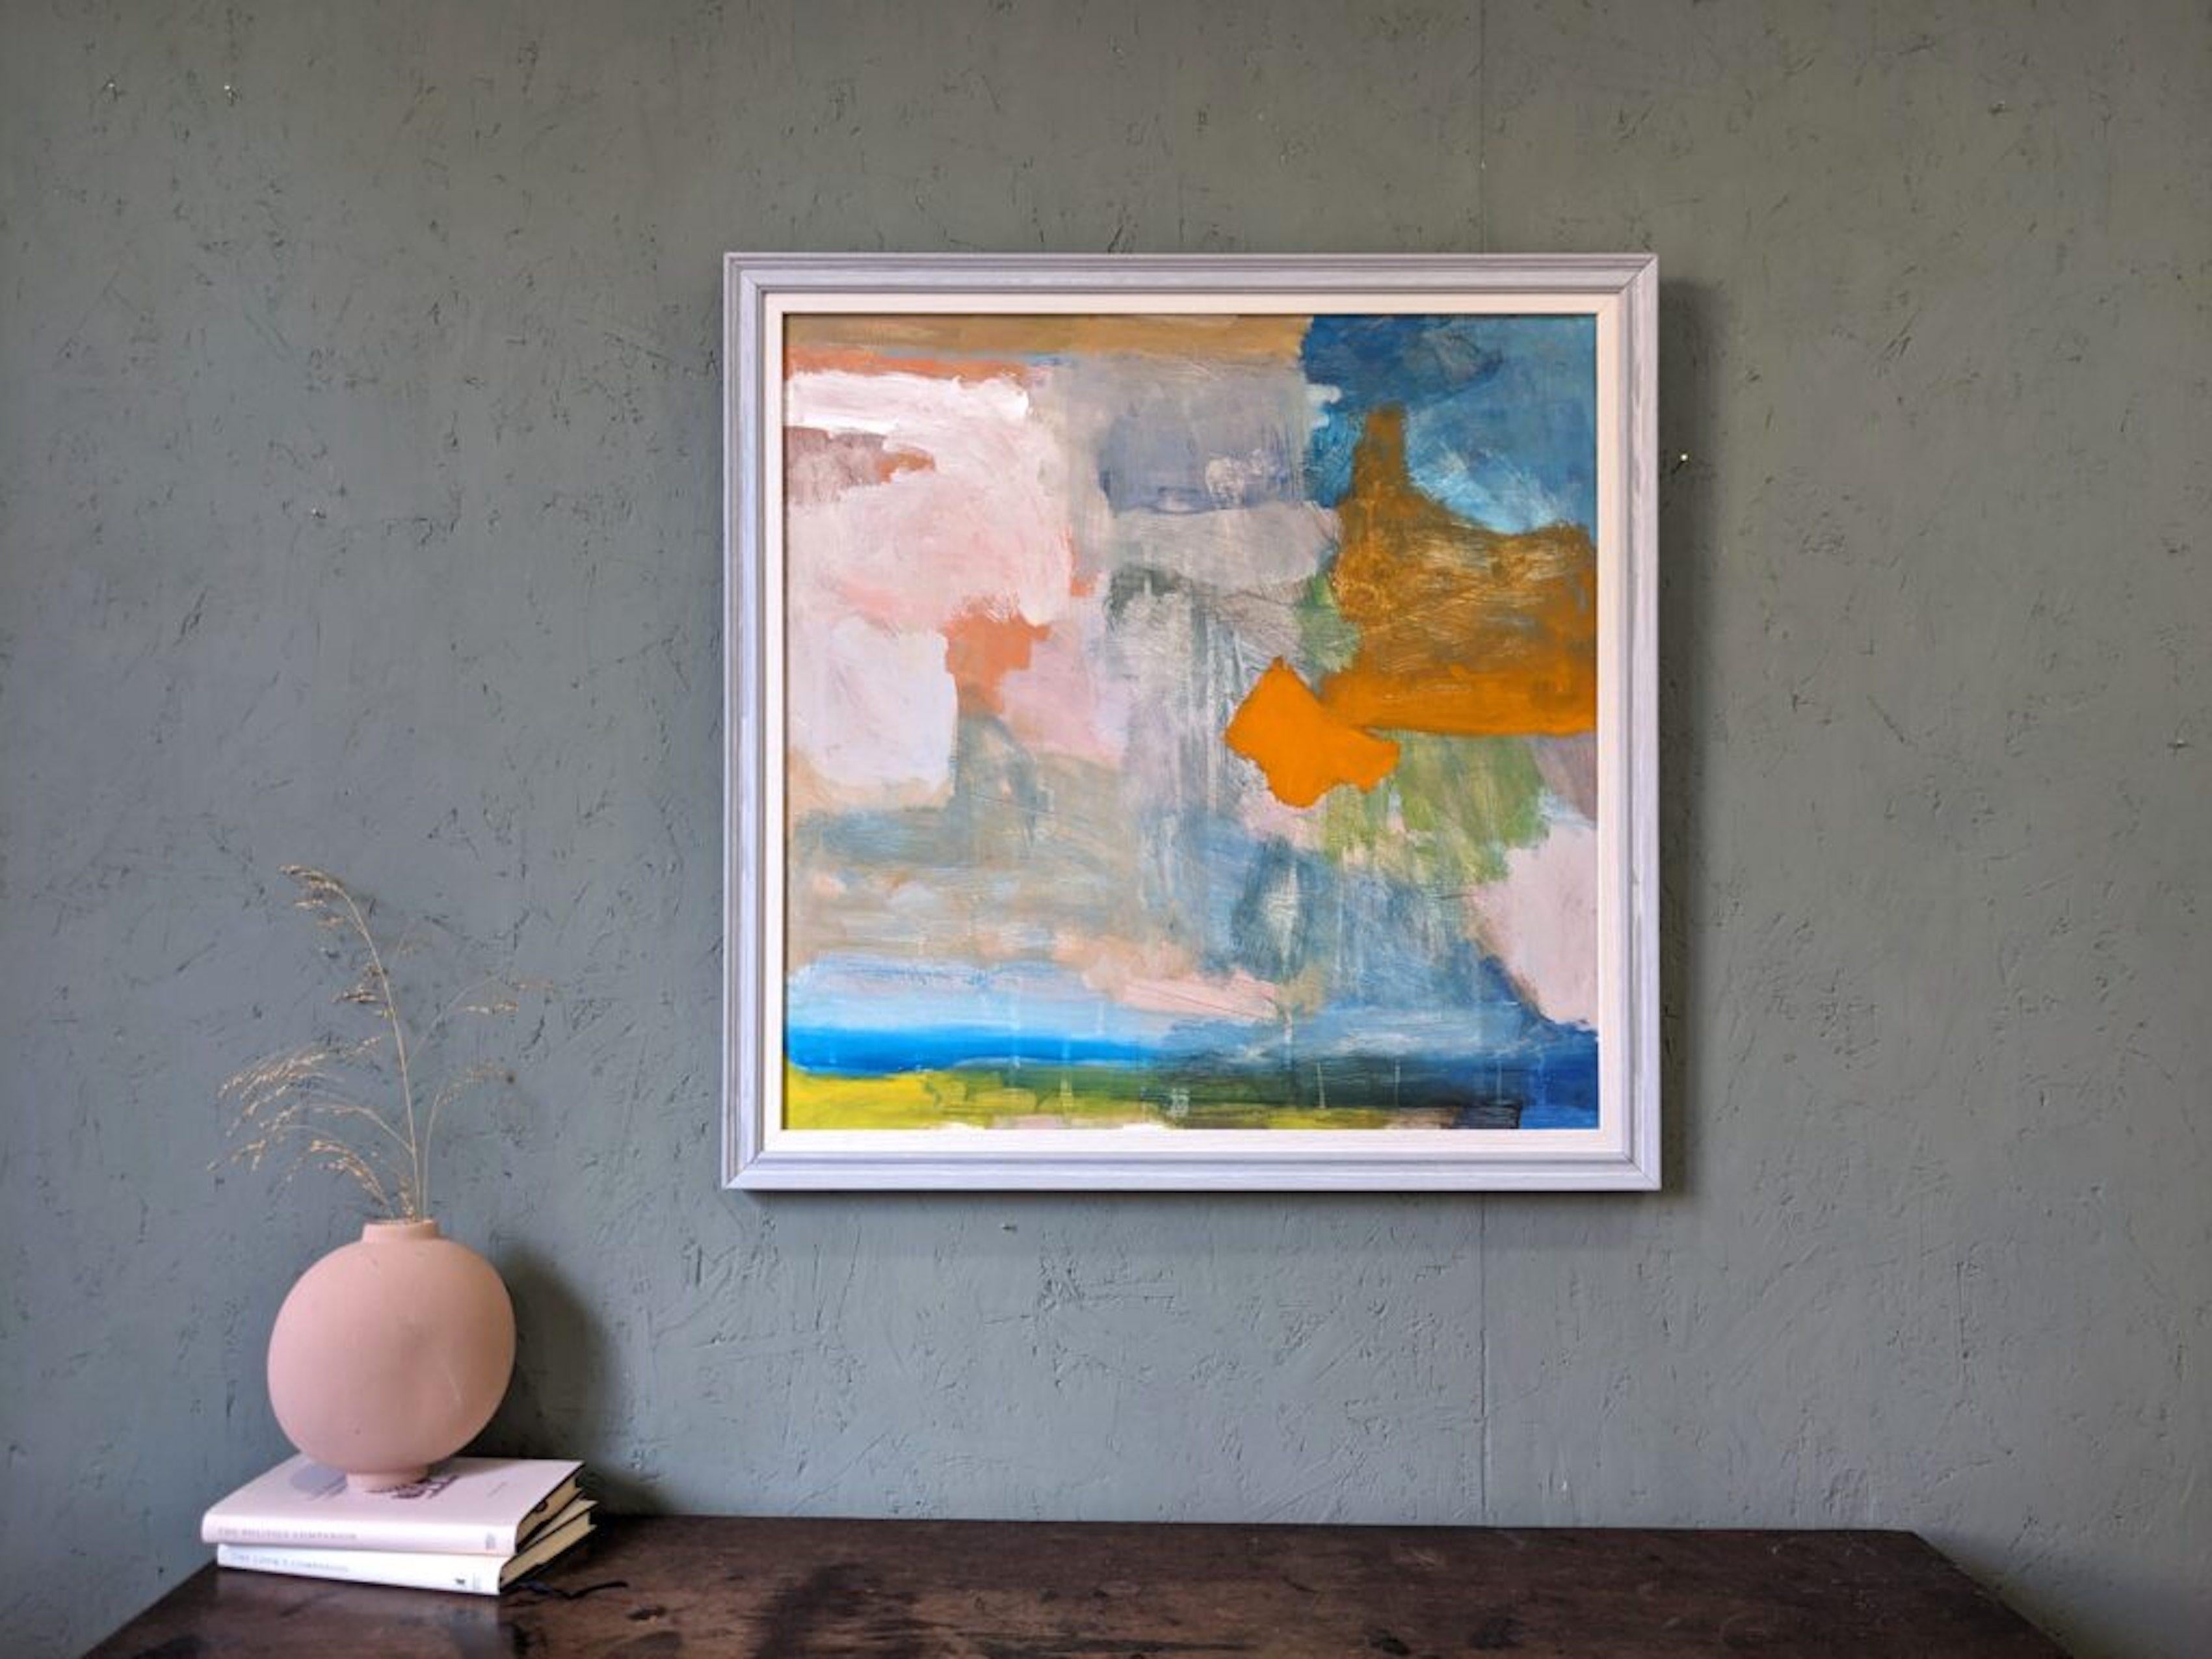 SUMMER ABSTRACTION
Size: 65.5 x 65.5 cm (including frame)
Oil on board

A very atmospheric abstract coastal scape painting, executed in oil onto board by contemporary British artist Ian Mood.

Inspired by coastlines, this expansive abstract painting